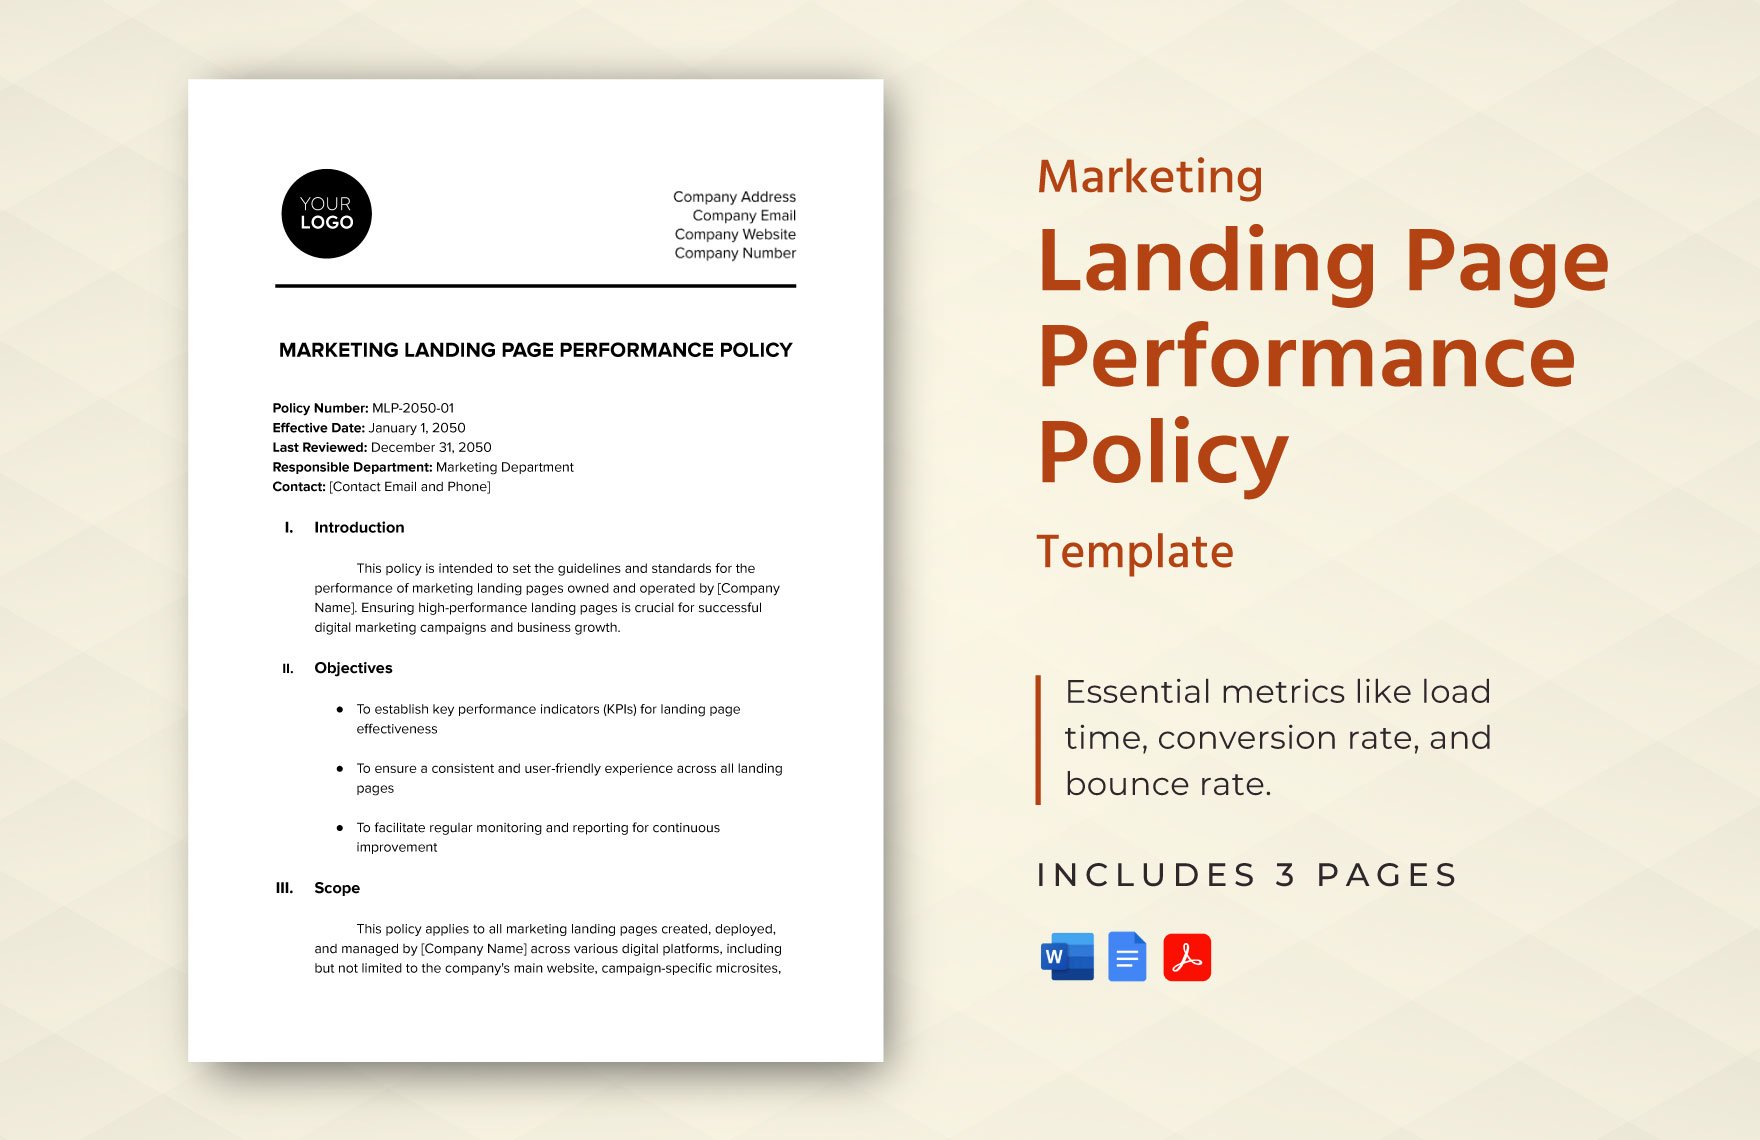 Marketing Landing Page Performance Policy Template